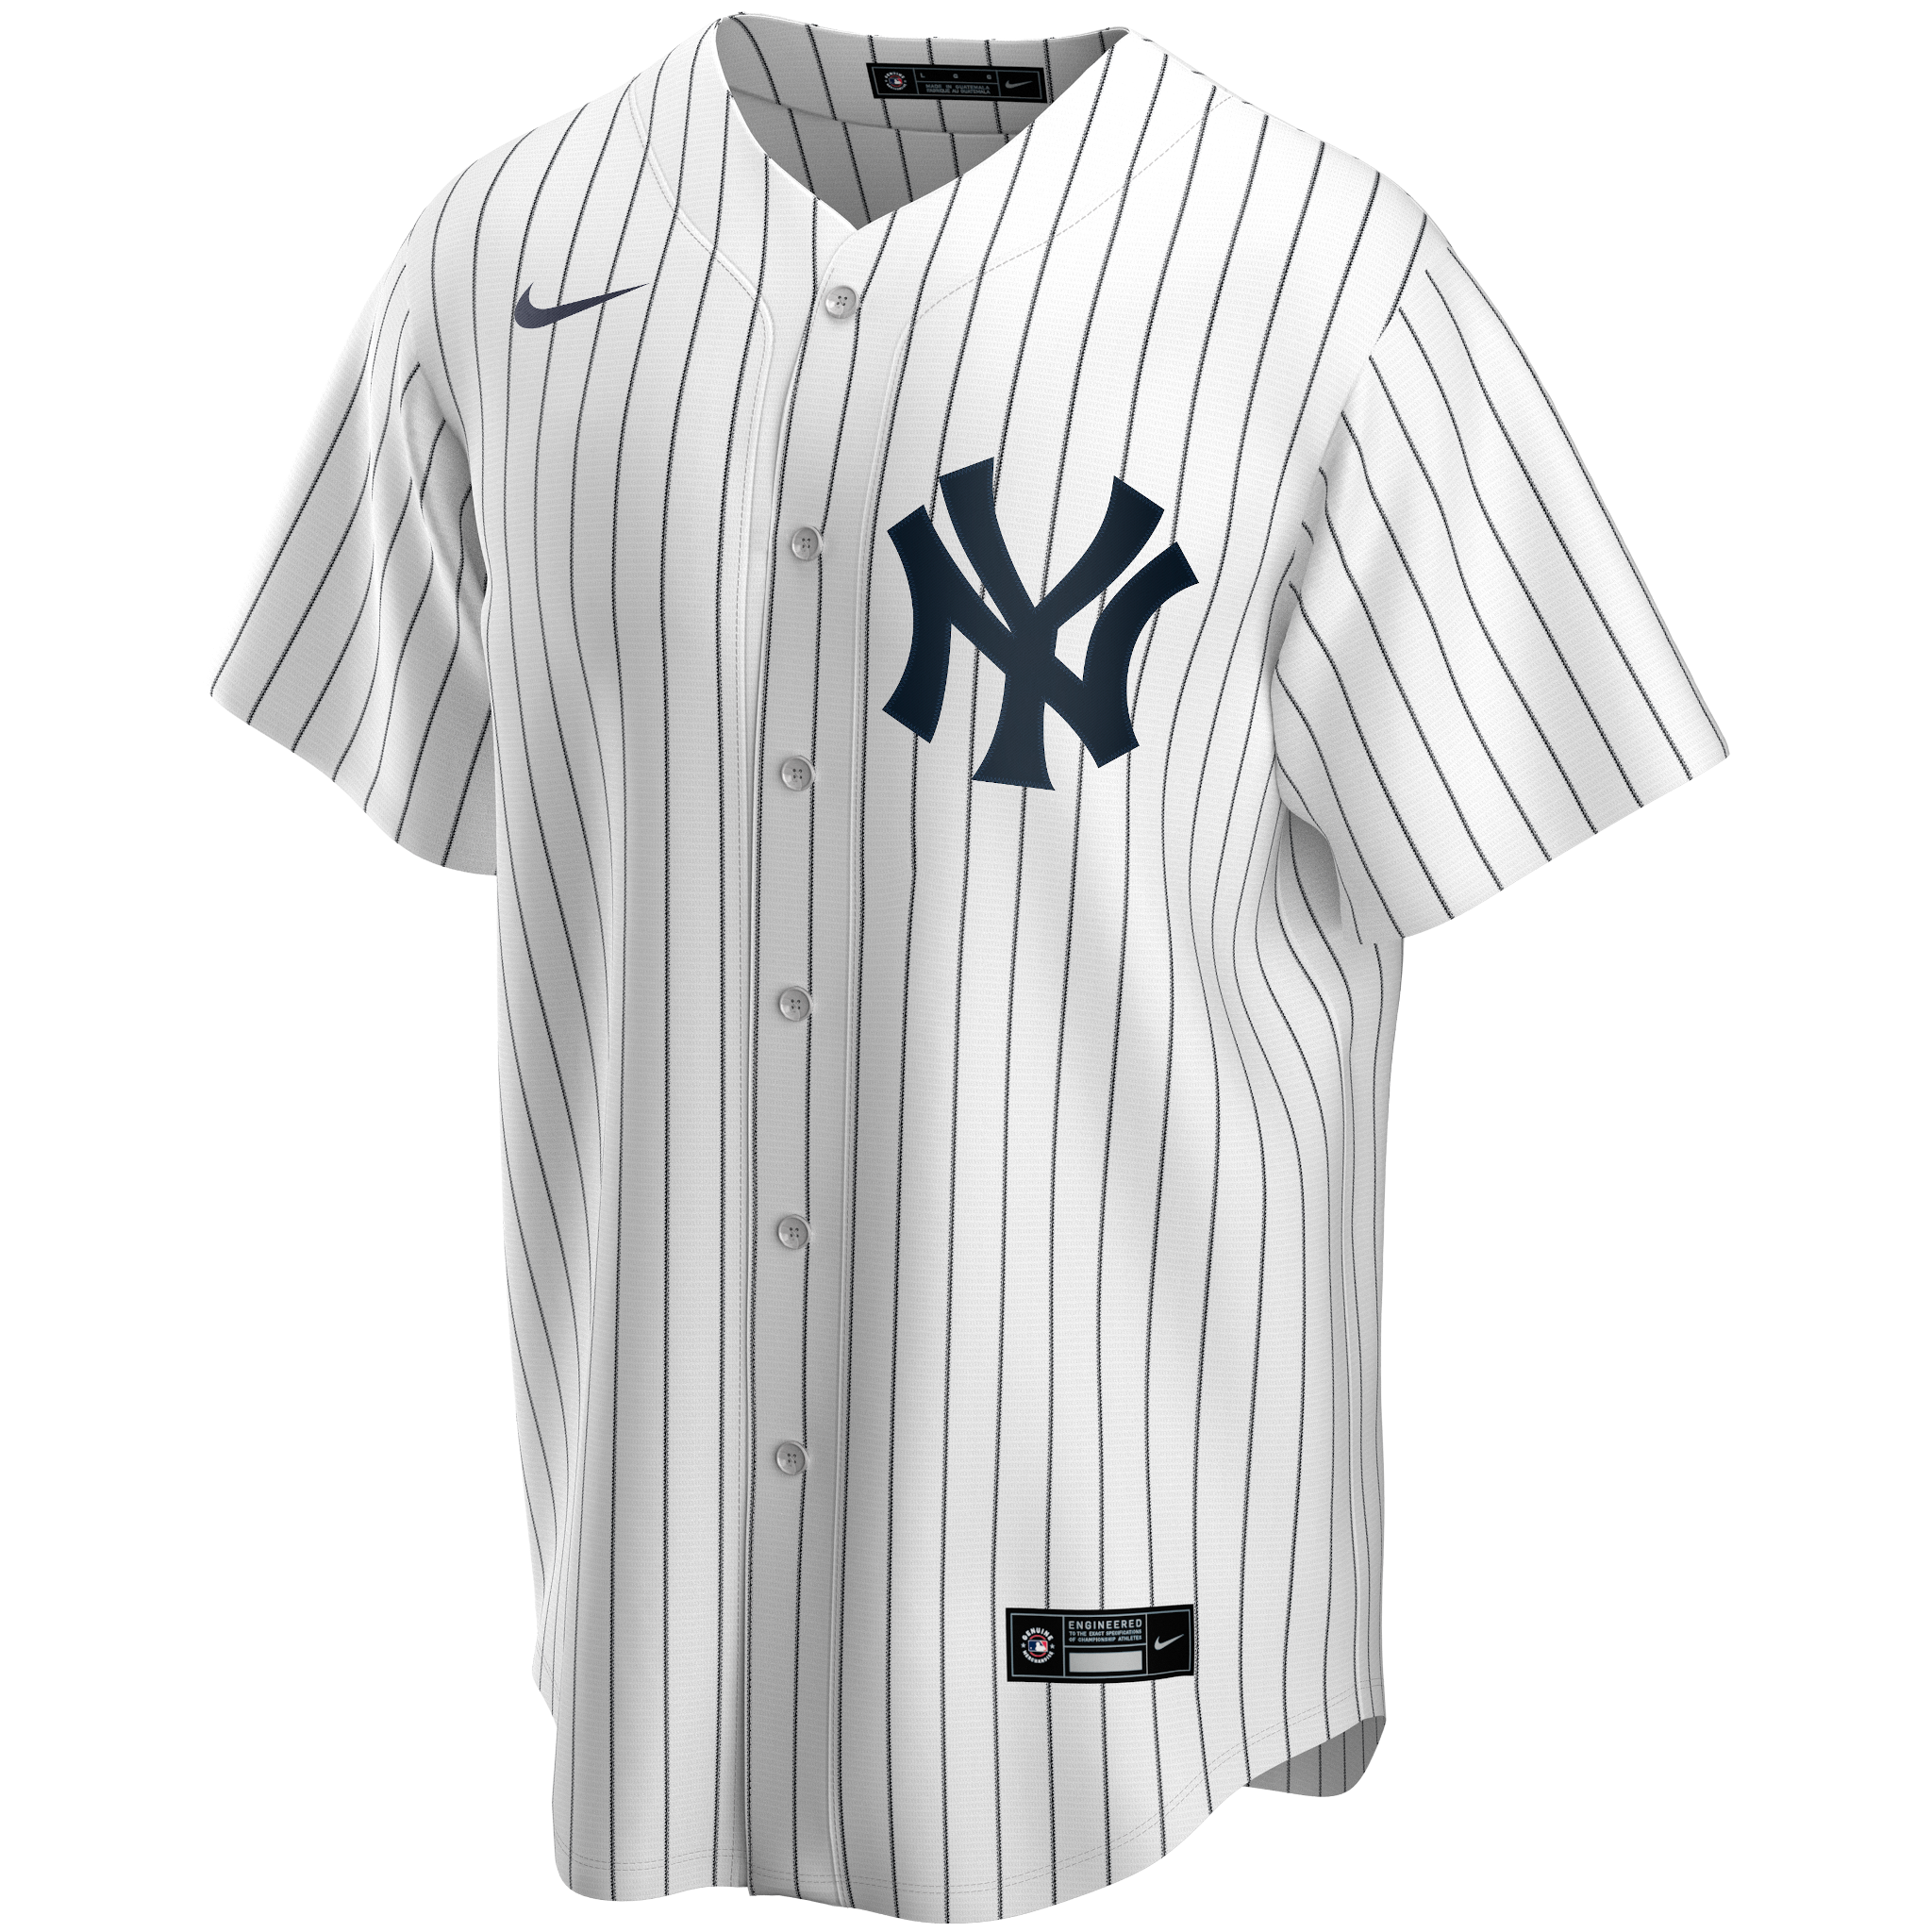 Catfish Hunter Jersey - NY Yankees Pinstripe Cooperstown Replica Throwback  Jersey